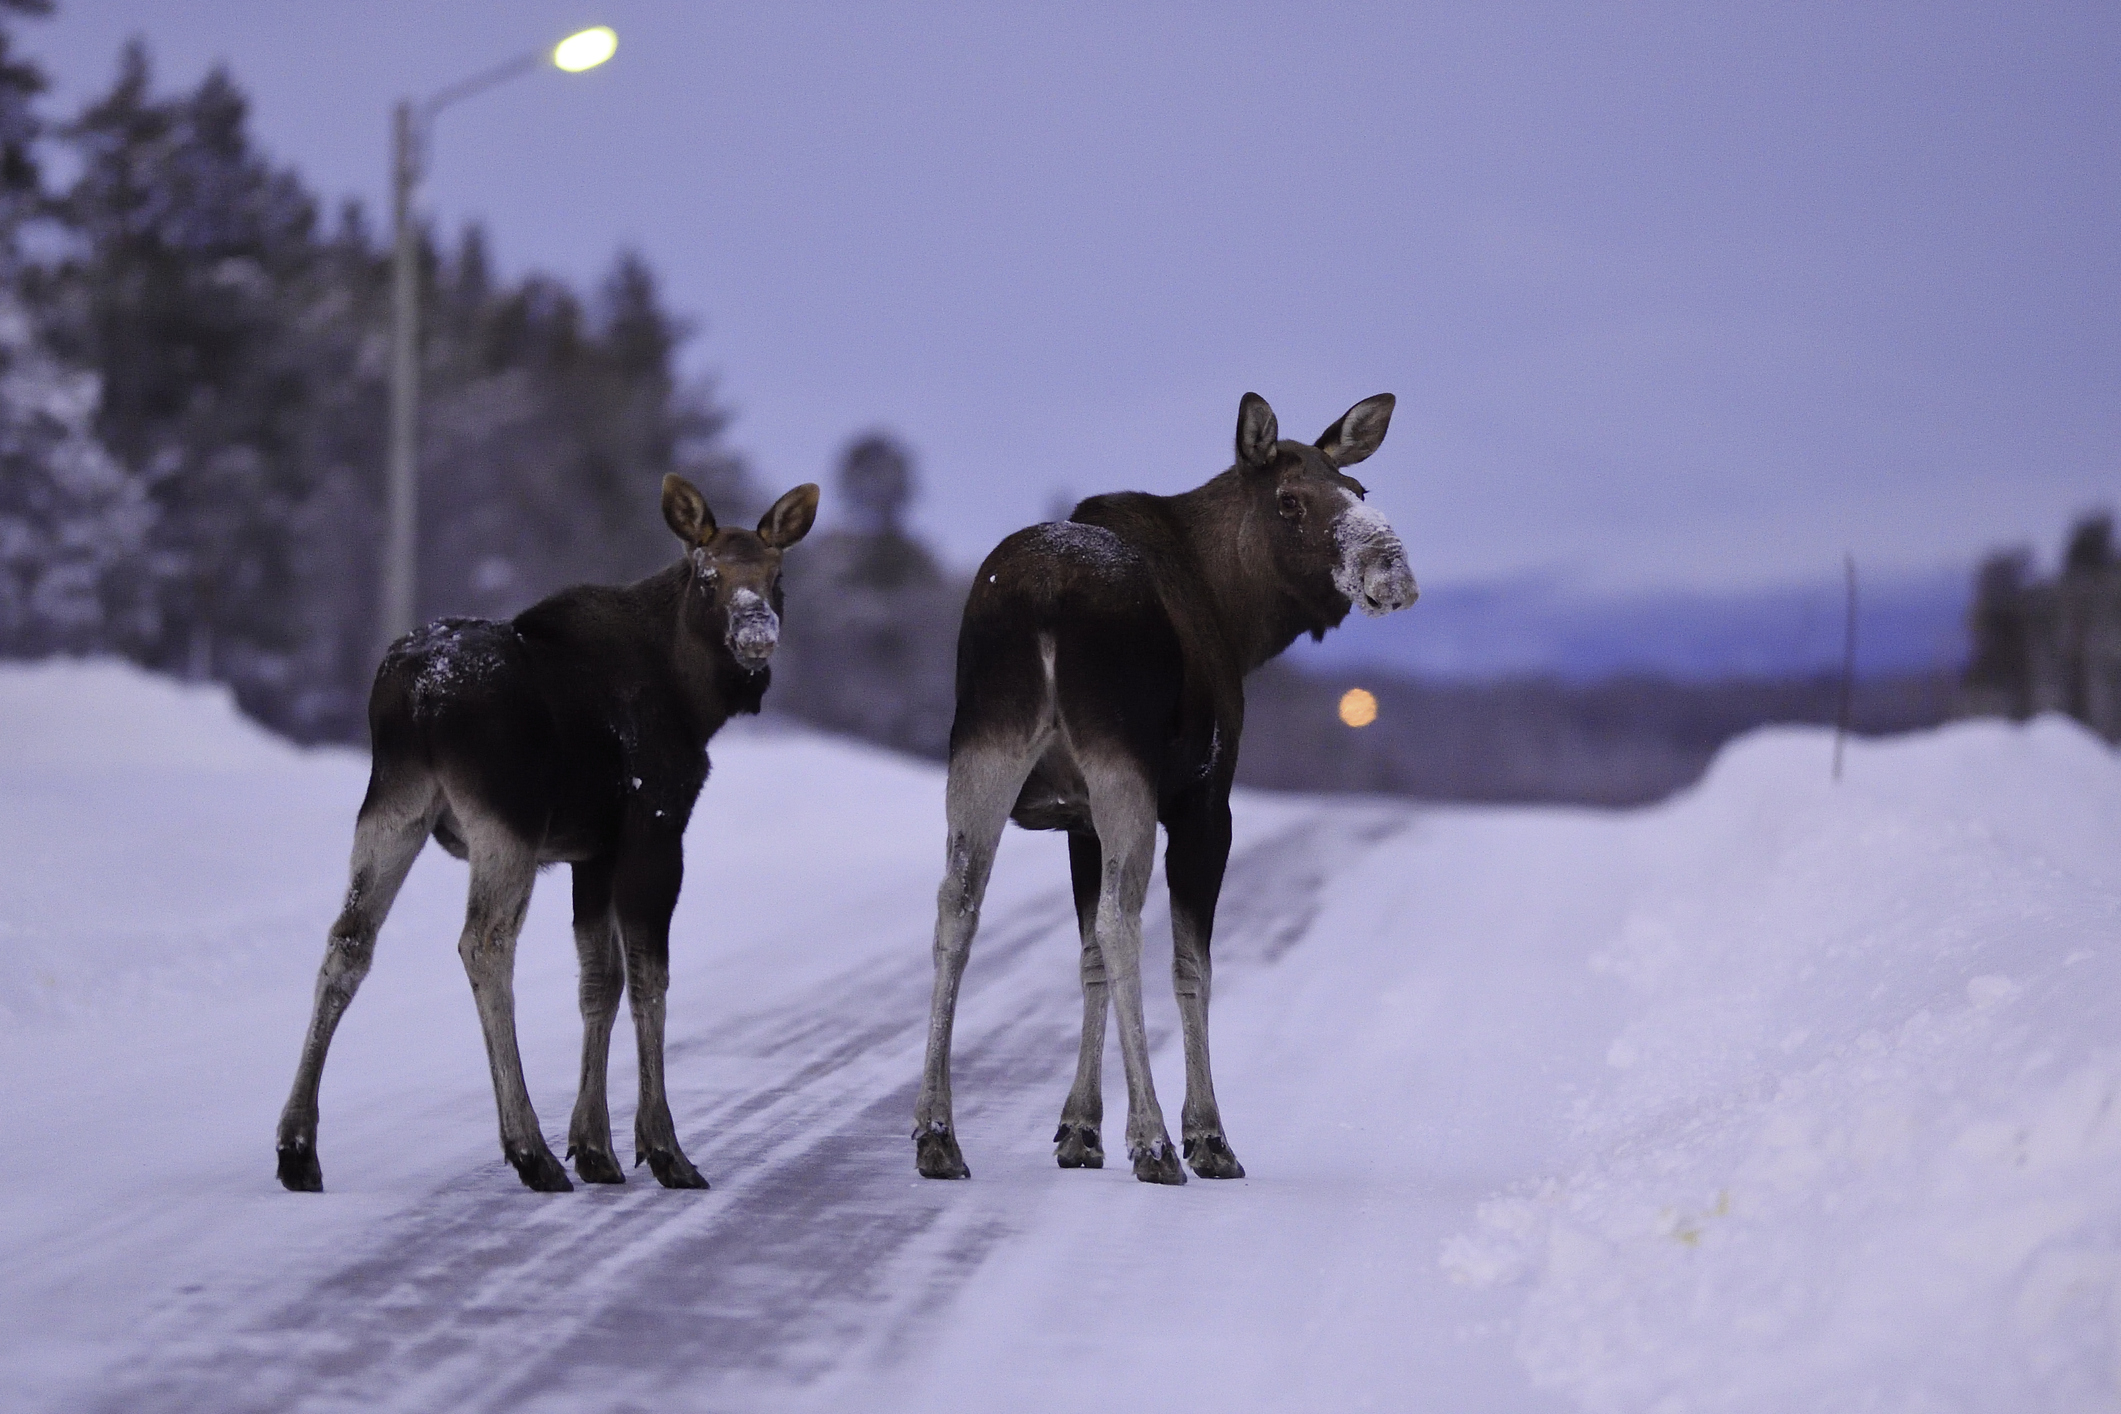 Two moose standing on a snowy road during twilight